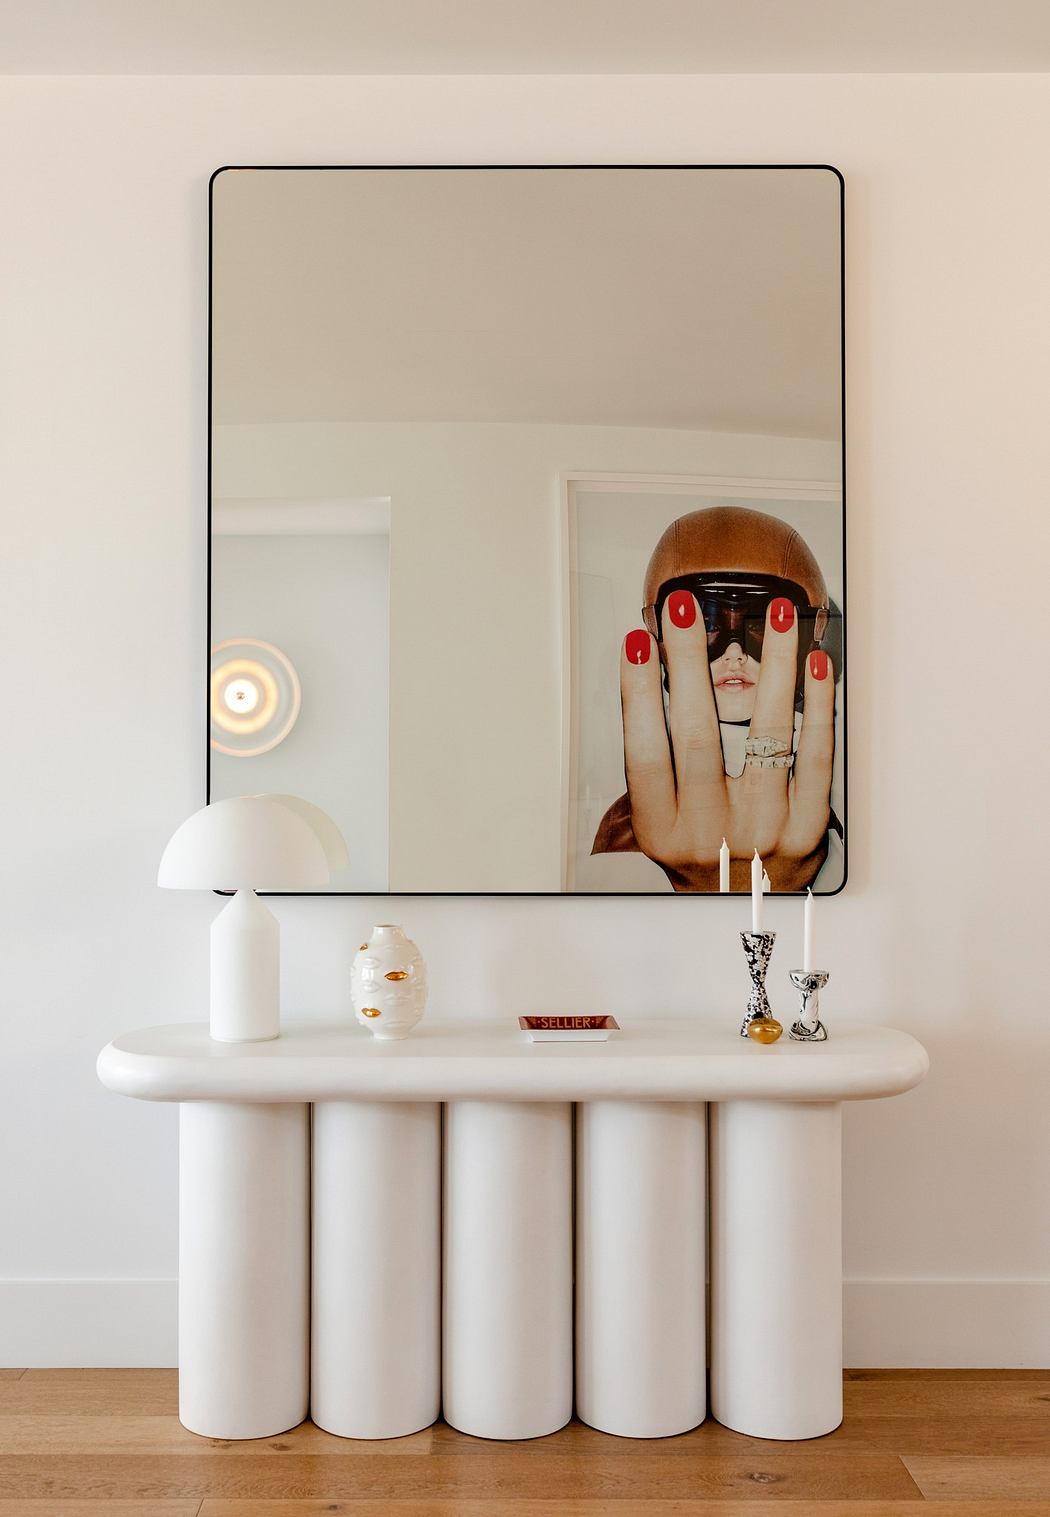 Modern vanity with round mirror, unique cylindrical base, and minimalistic decor.